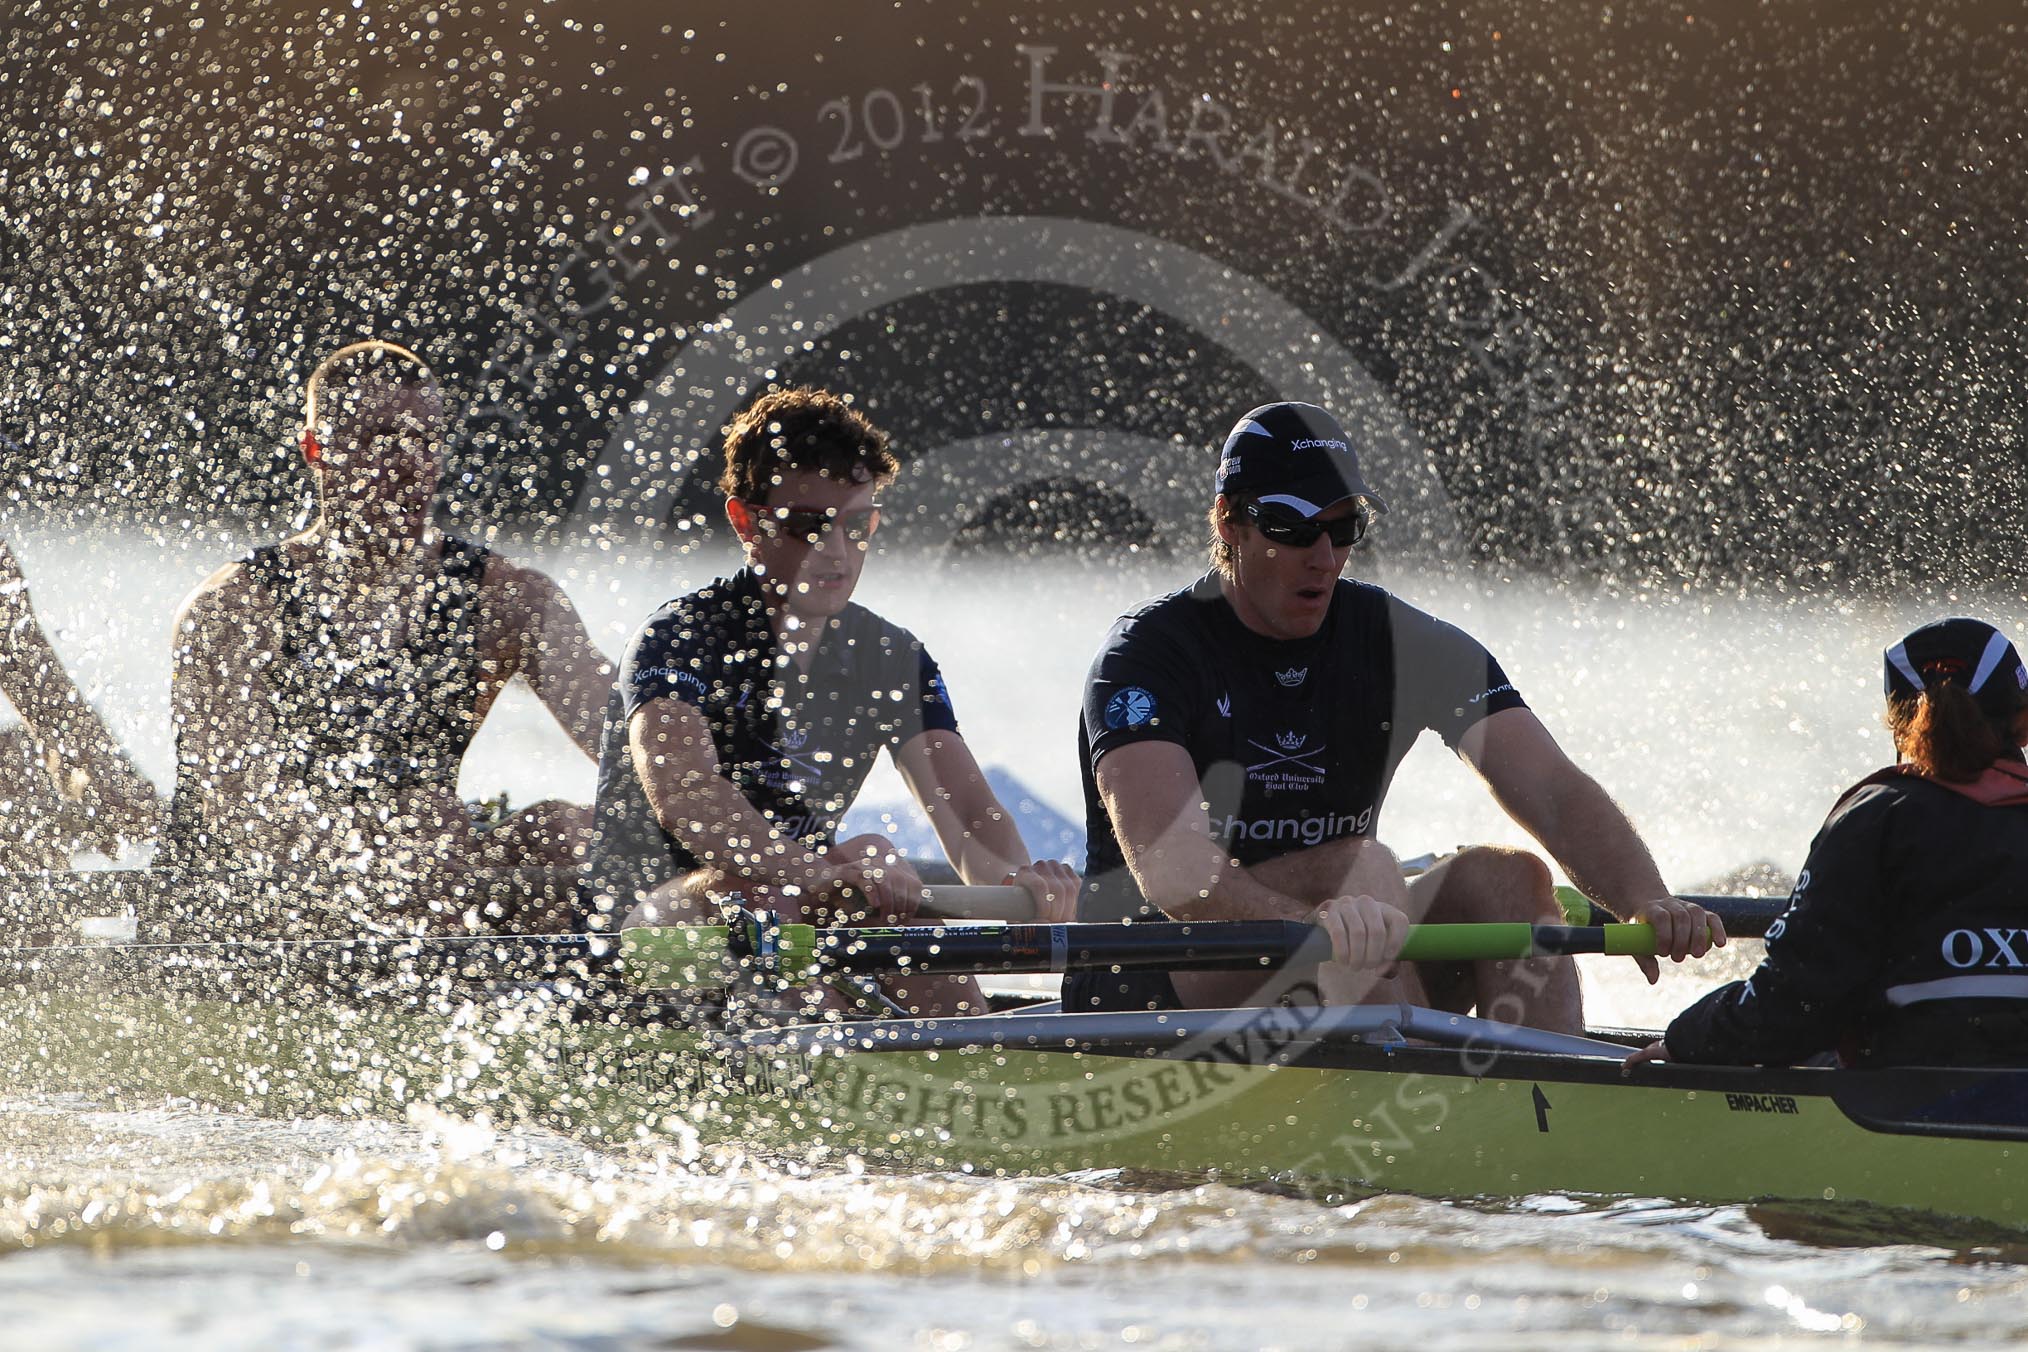 The Boat Race season 2012 - fixture OUBC vs German U23: Approaching the finish line of the second race, the Oxford Blue Boat, from left to right Alex Davidson, Dan Harvey, stern Roel Haen, and cox Zoe de Toledo..
River Thames between Putney and Mortlake,
London,

United Kingdom,
on 26 February 2012 at 15:46, image #90